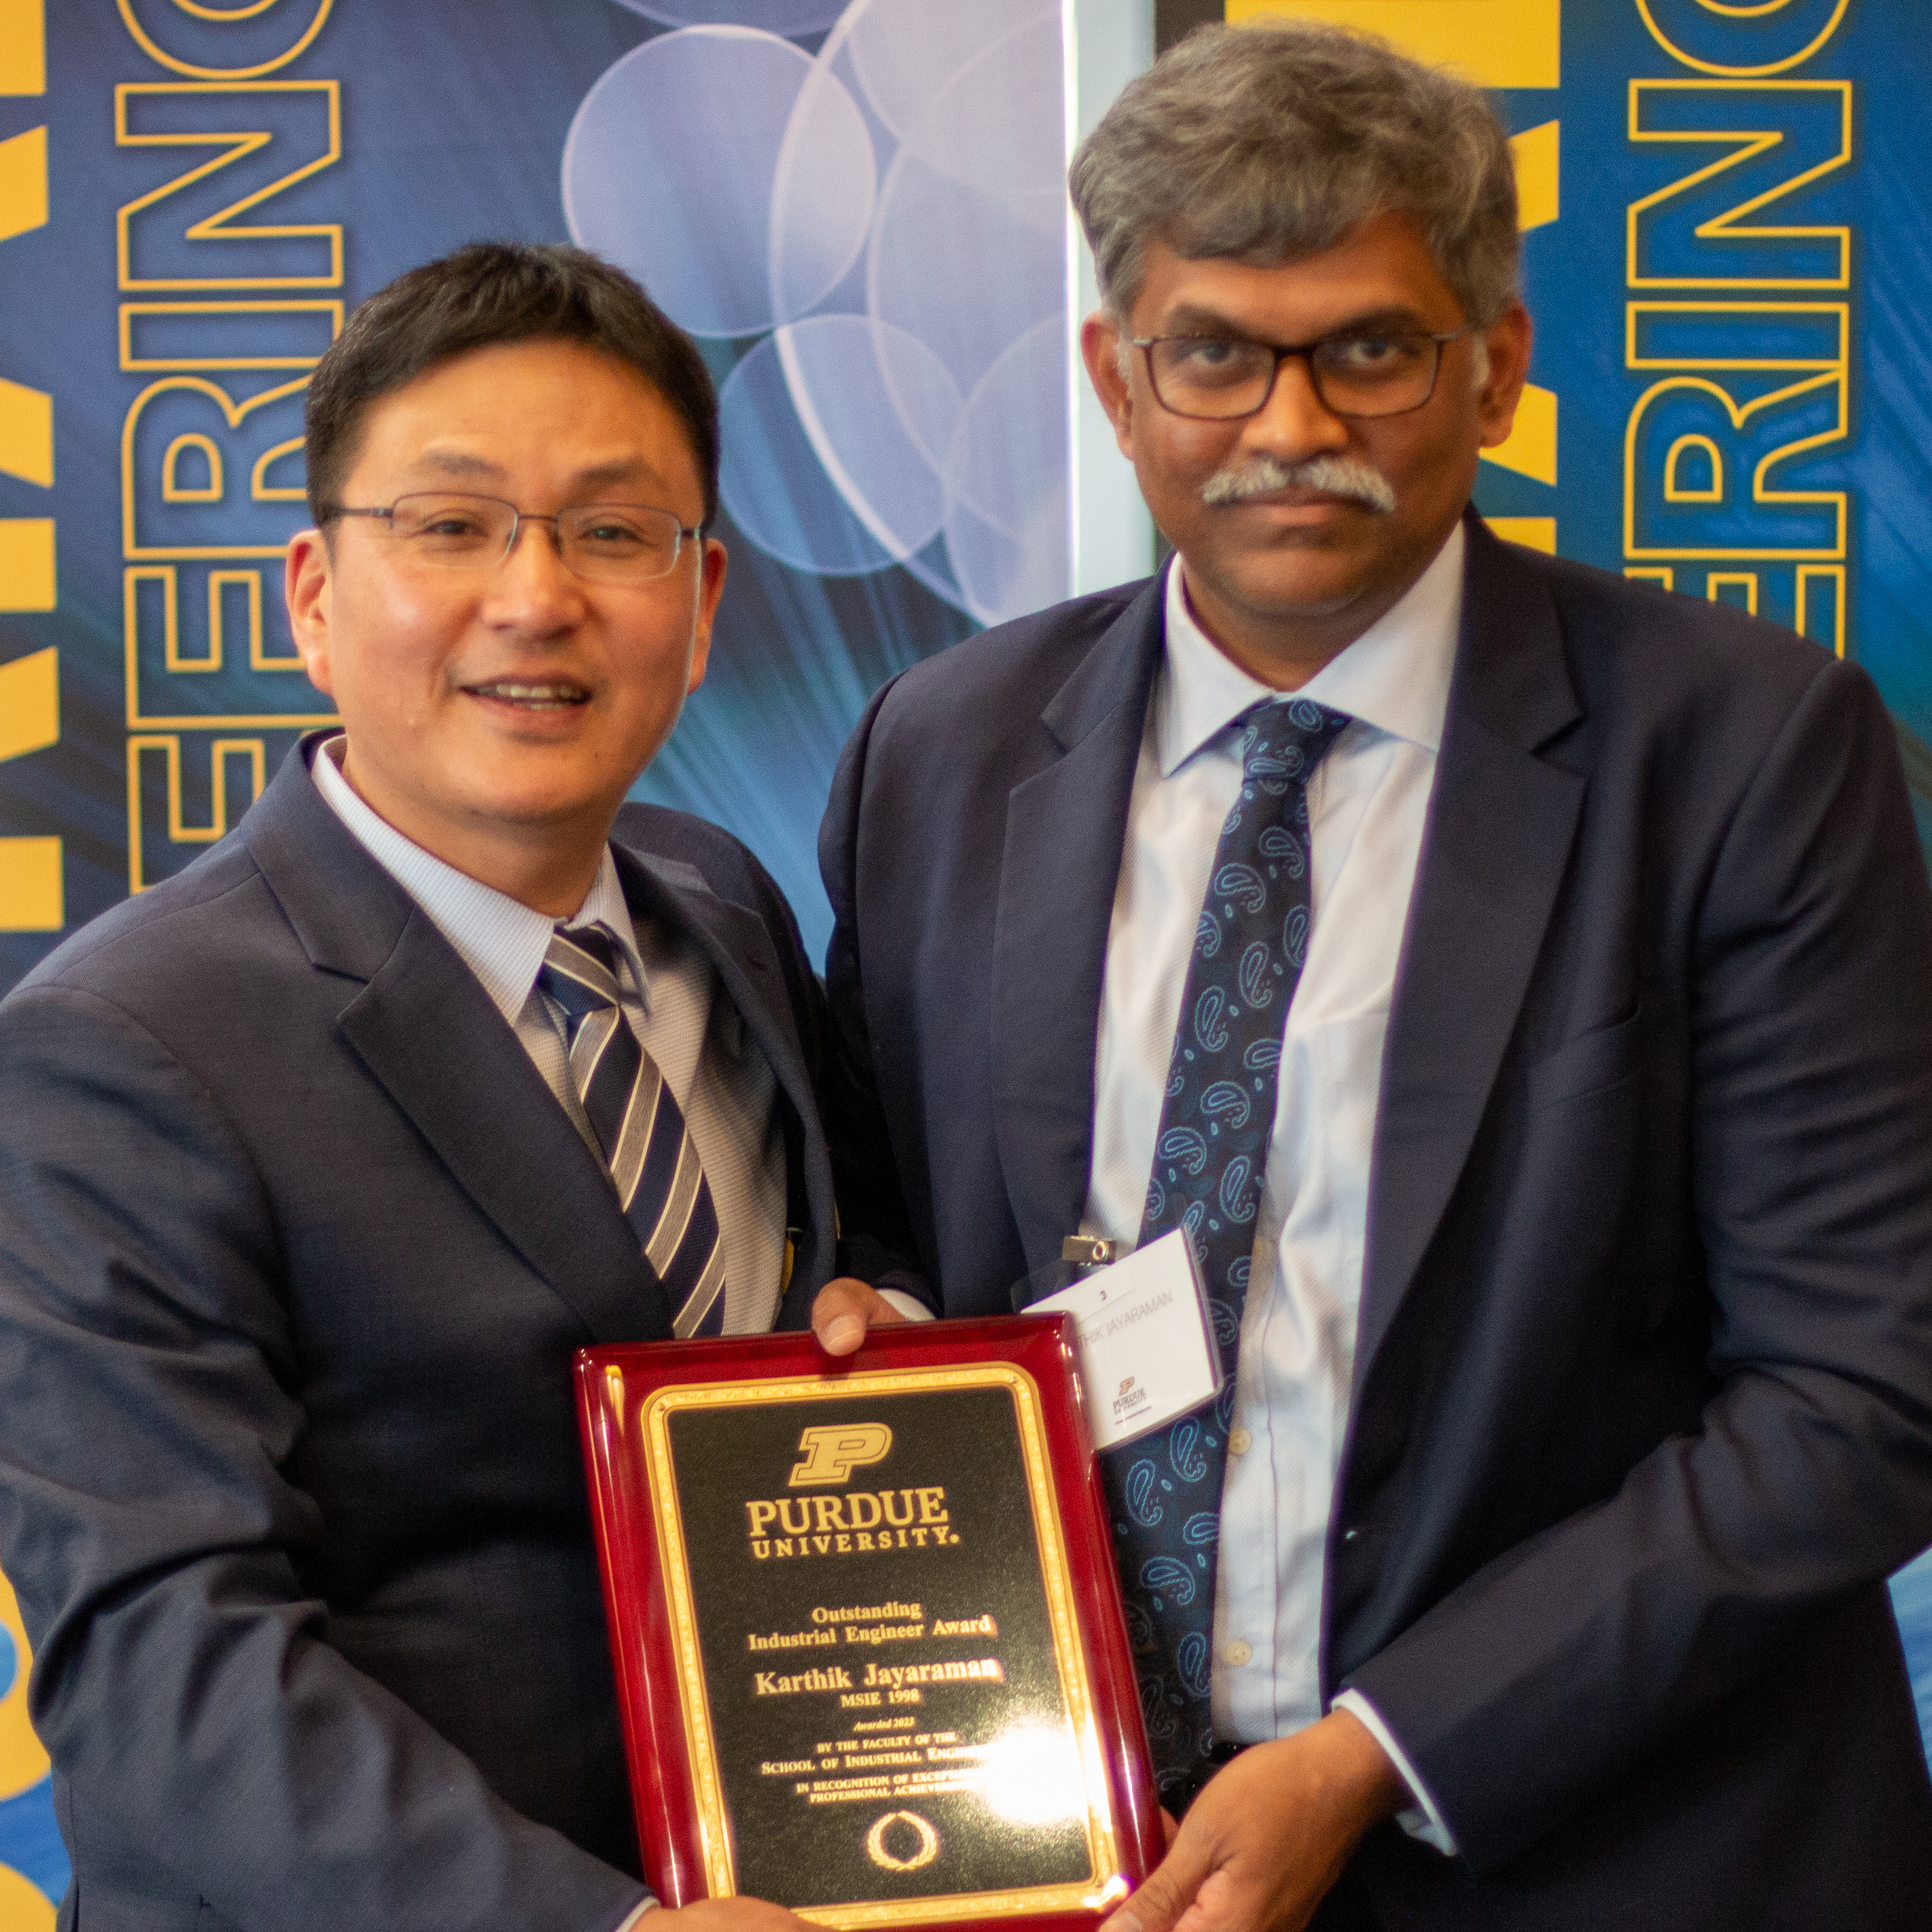 Posing with Dr. Son after accepting award.